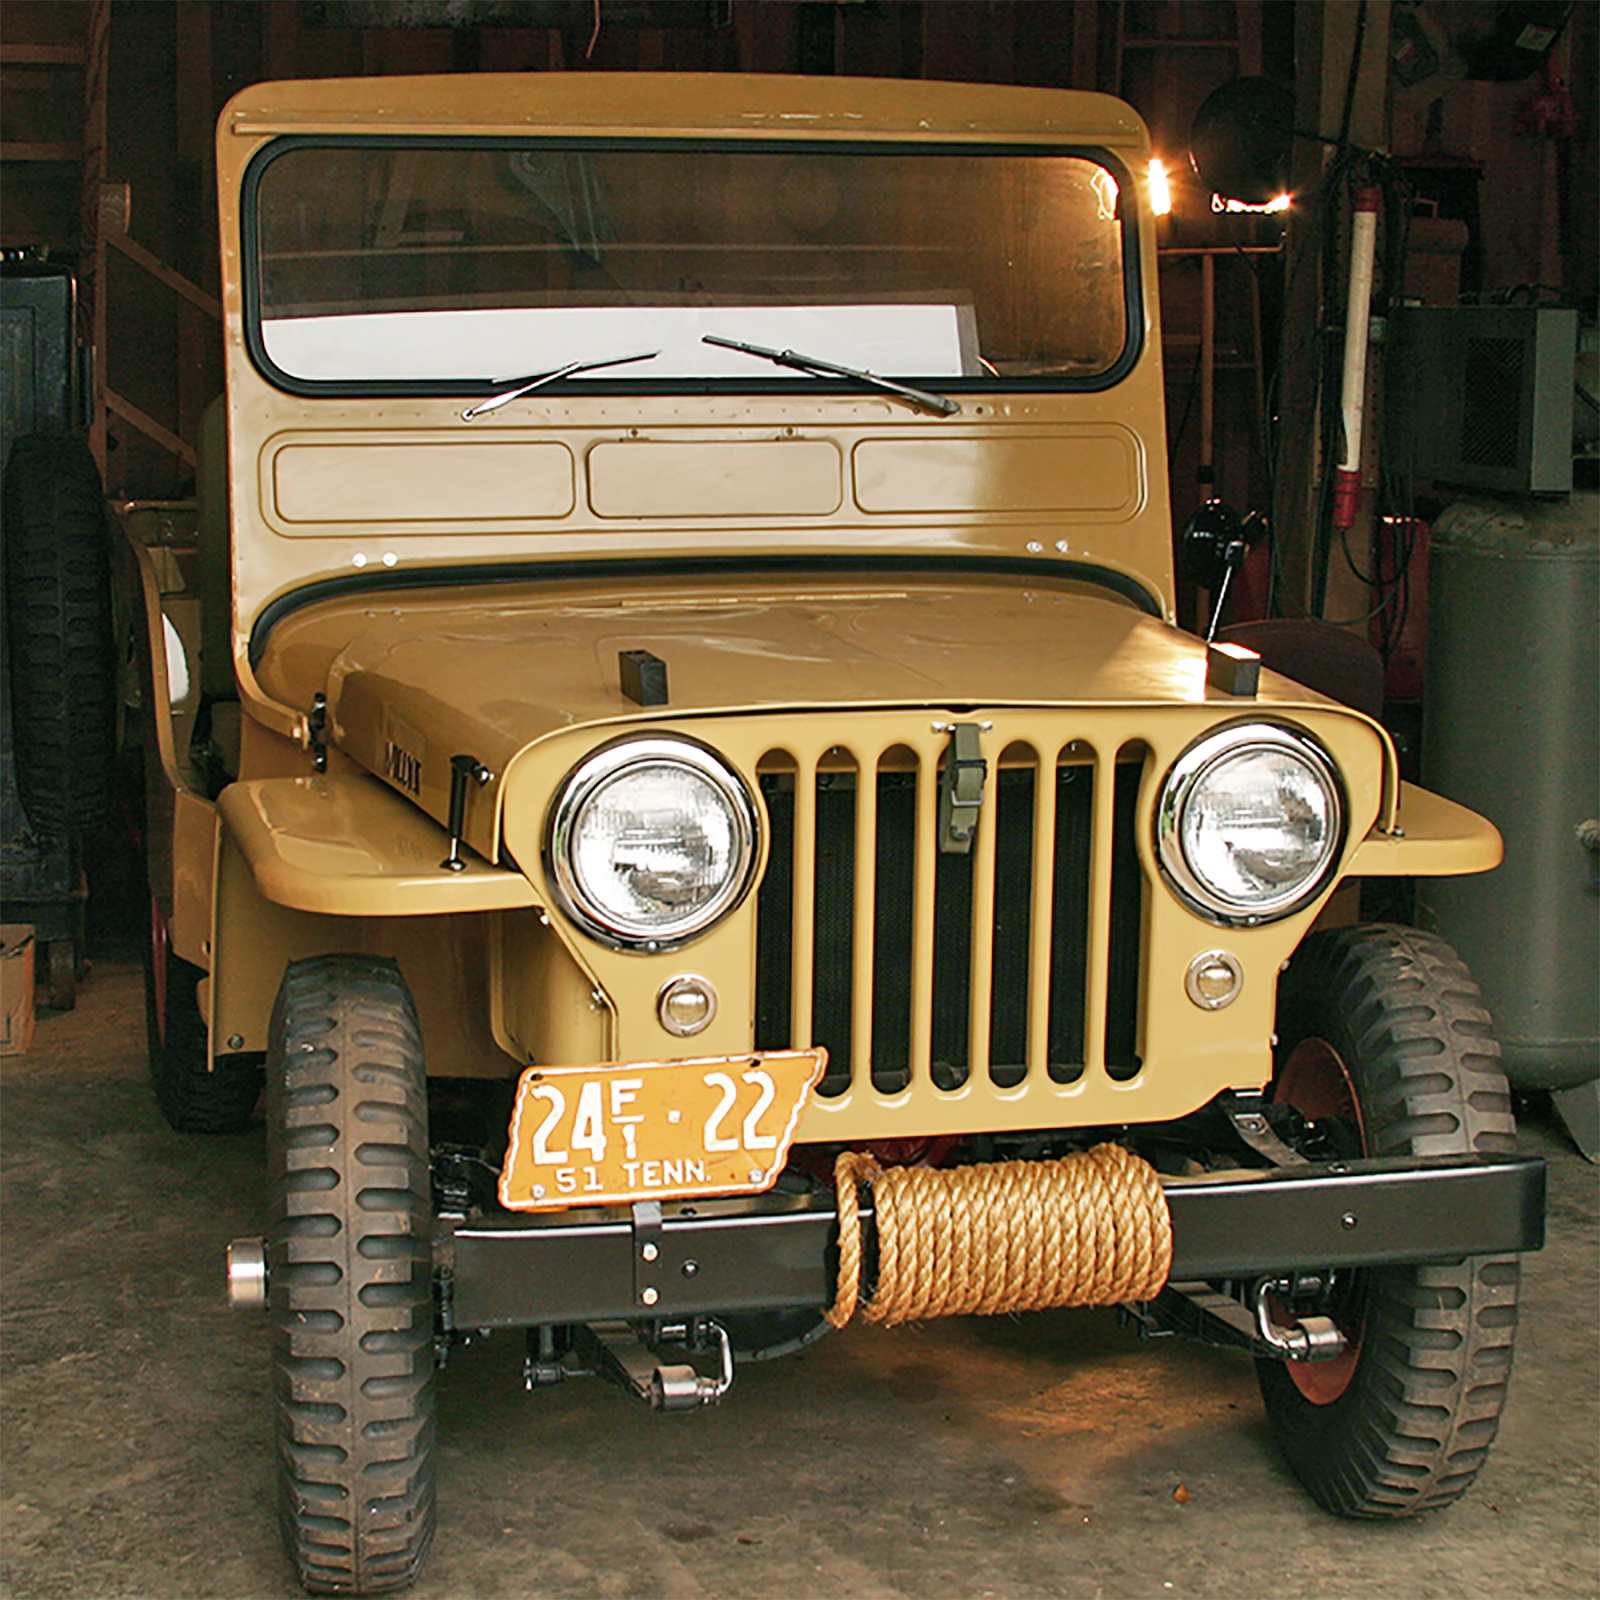 1951 restored Willy's Jeep, khaki-colored, with an orange and while Tennessee-shaped license plate on the front